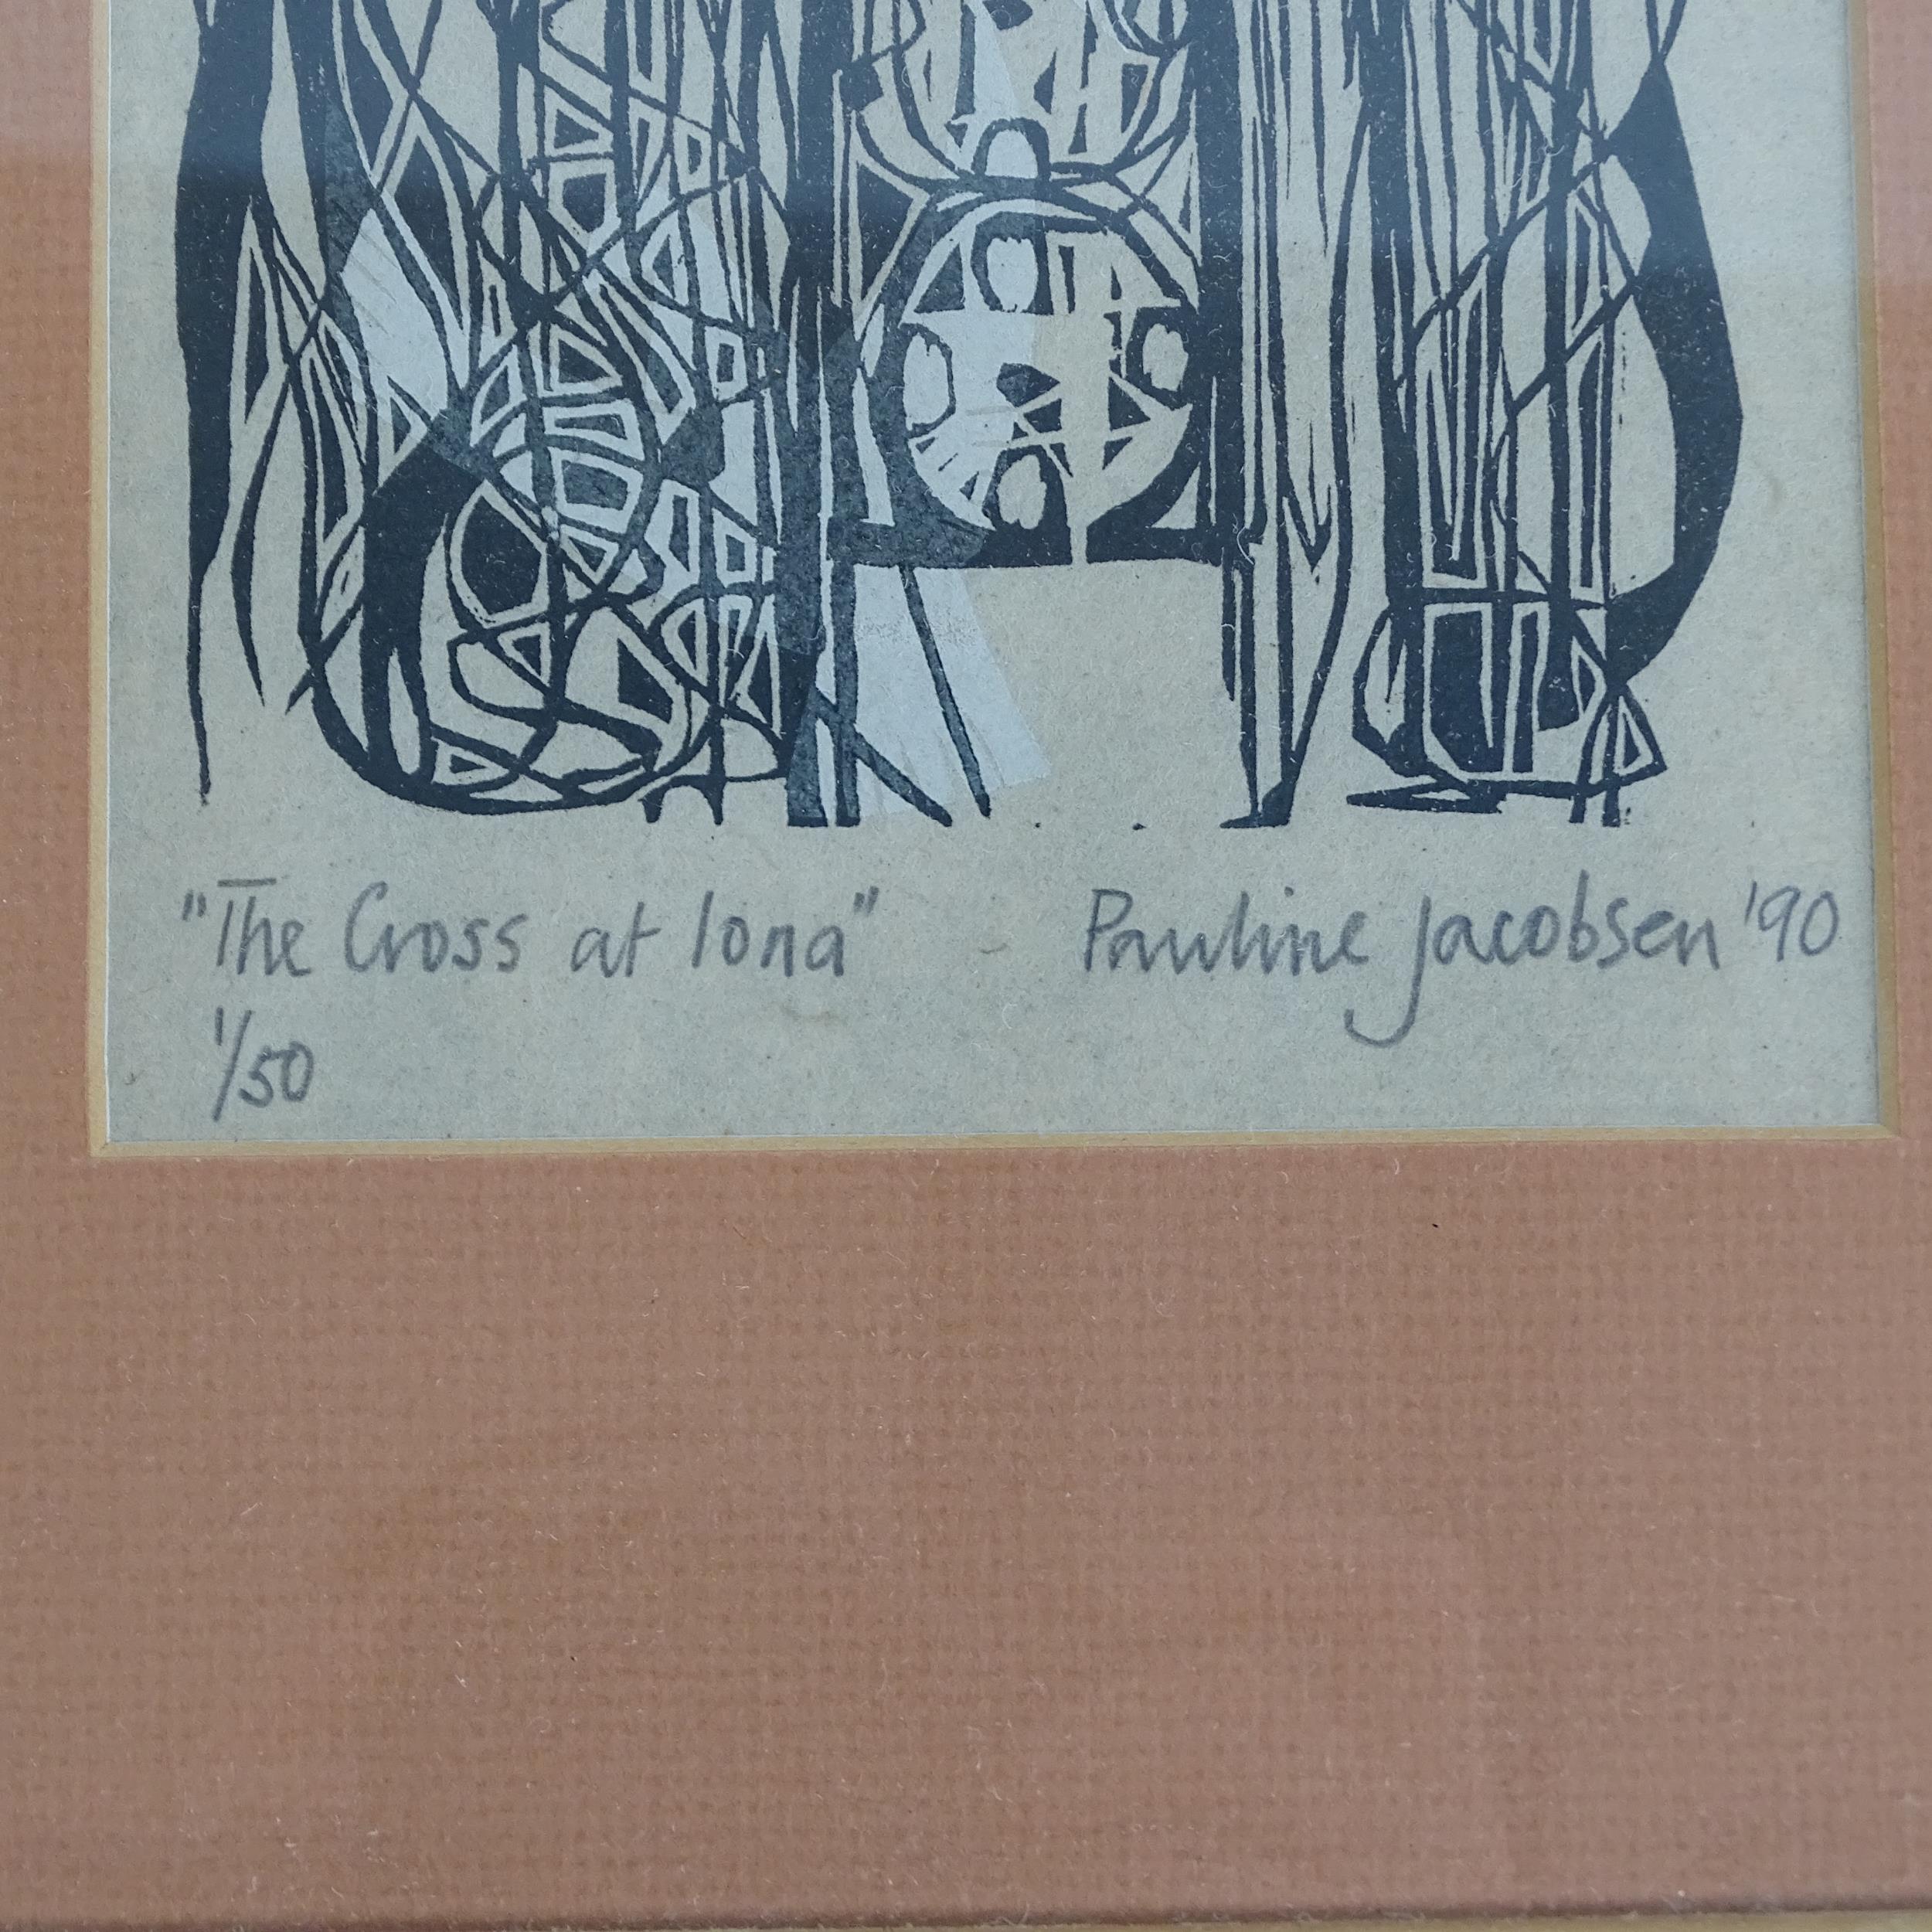 Pauline Jacobsen, limited edition woodblock print "the cross at Iona", 1/50, signed and dated '90, - Image 2 of 2